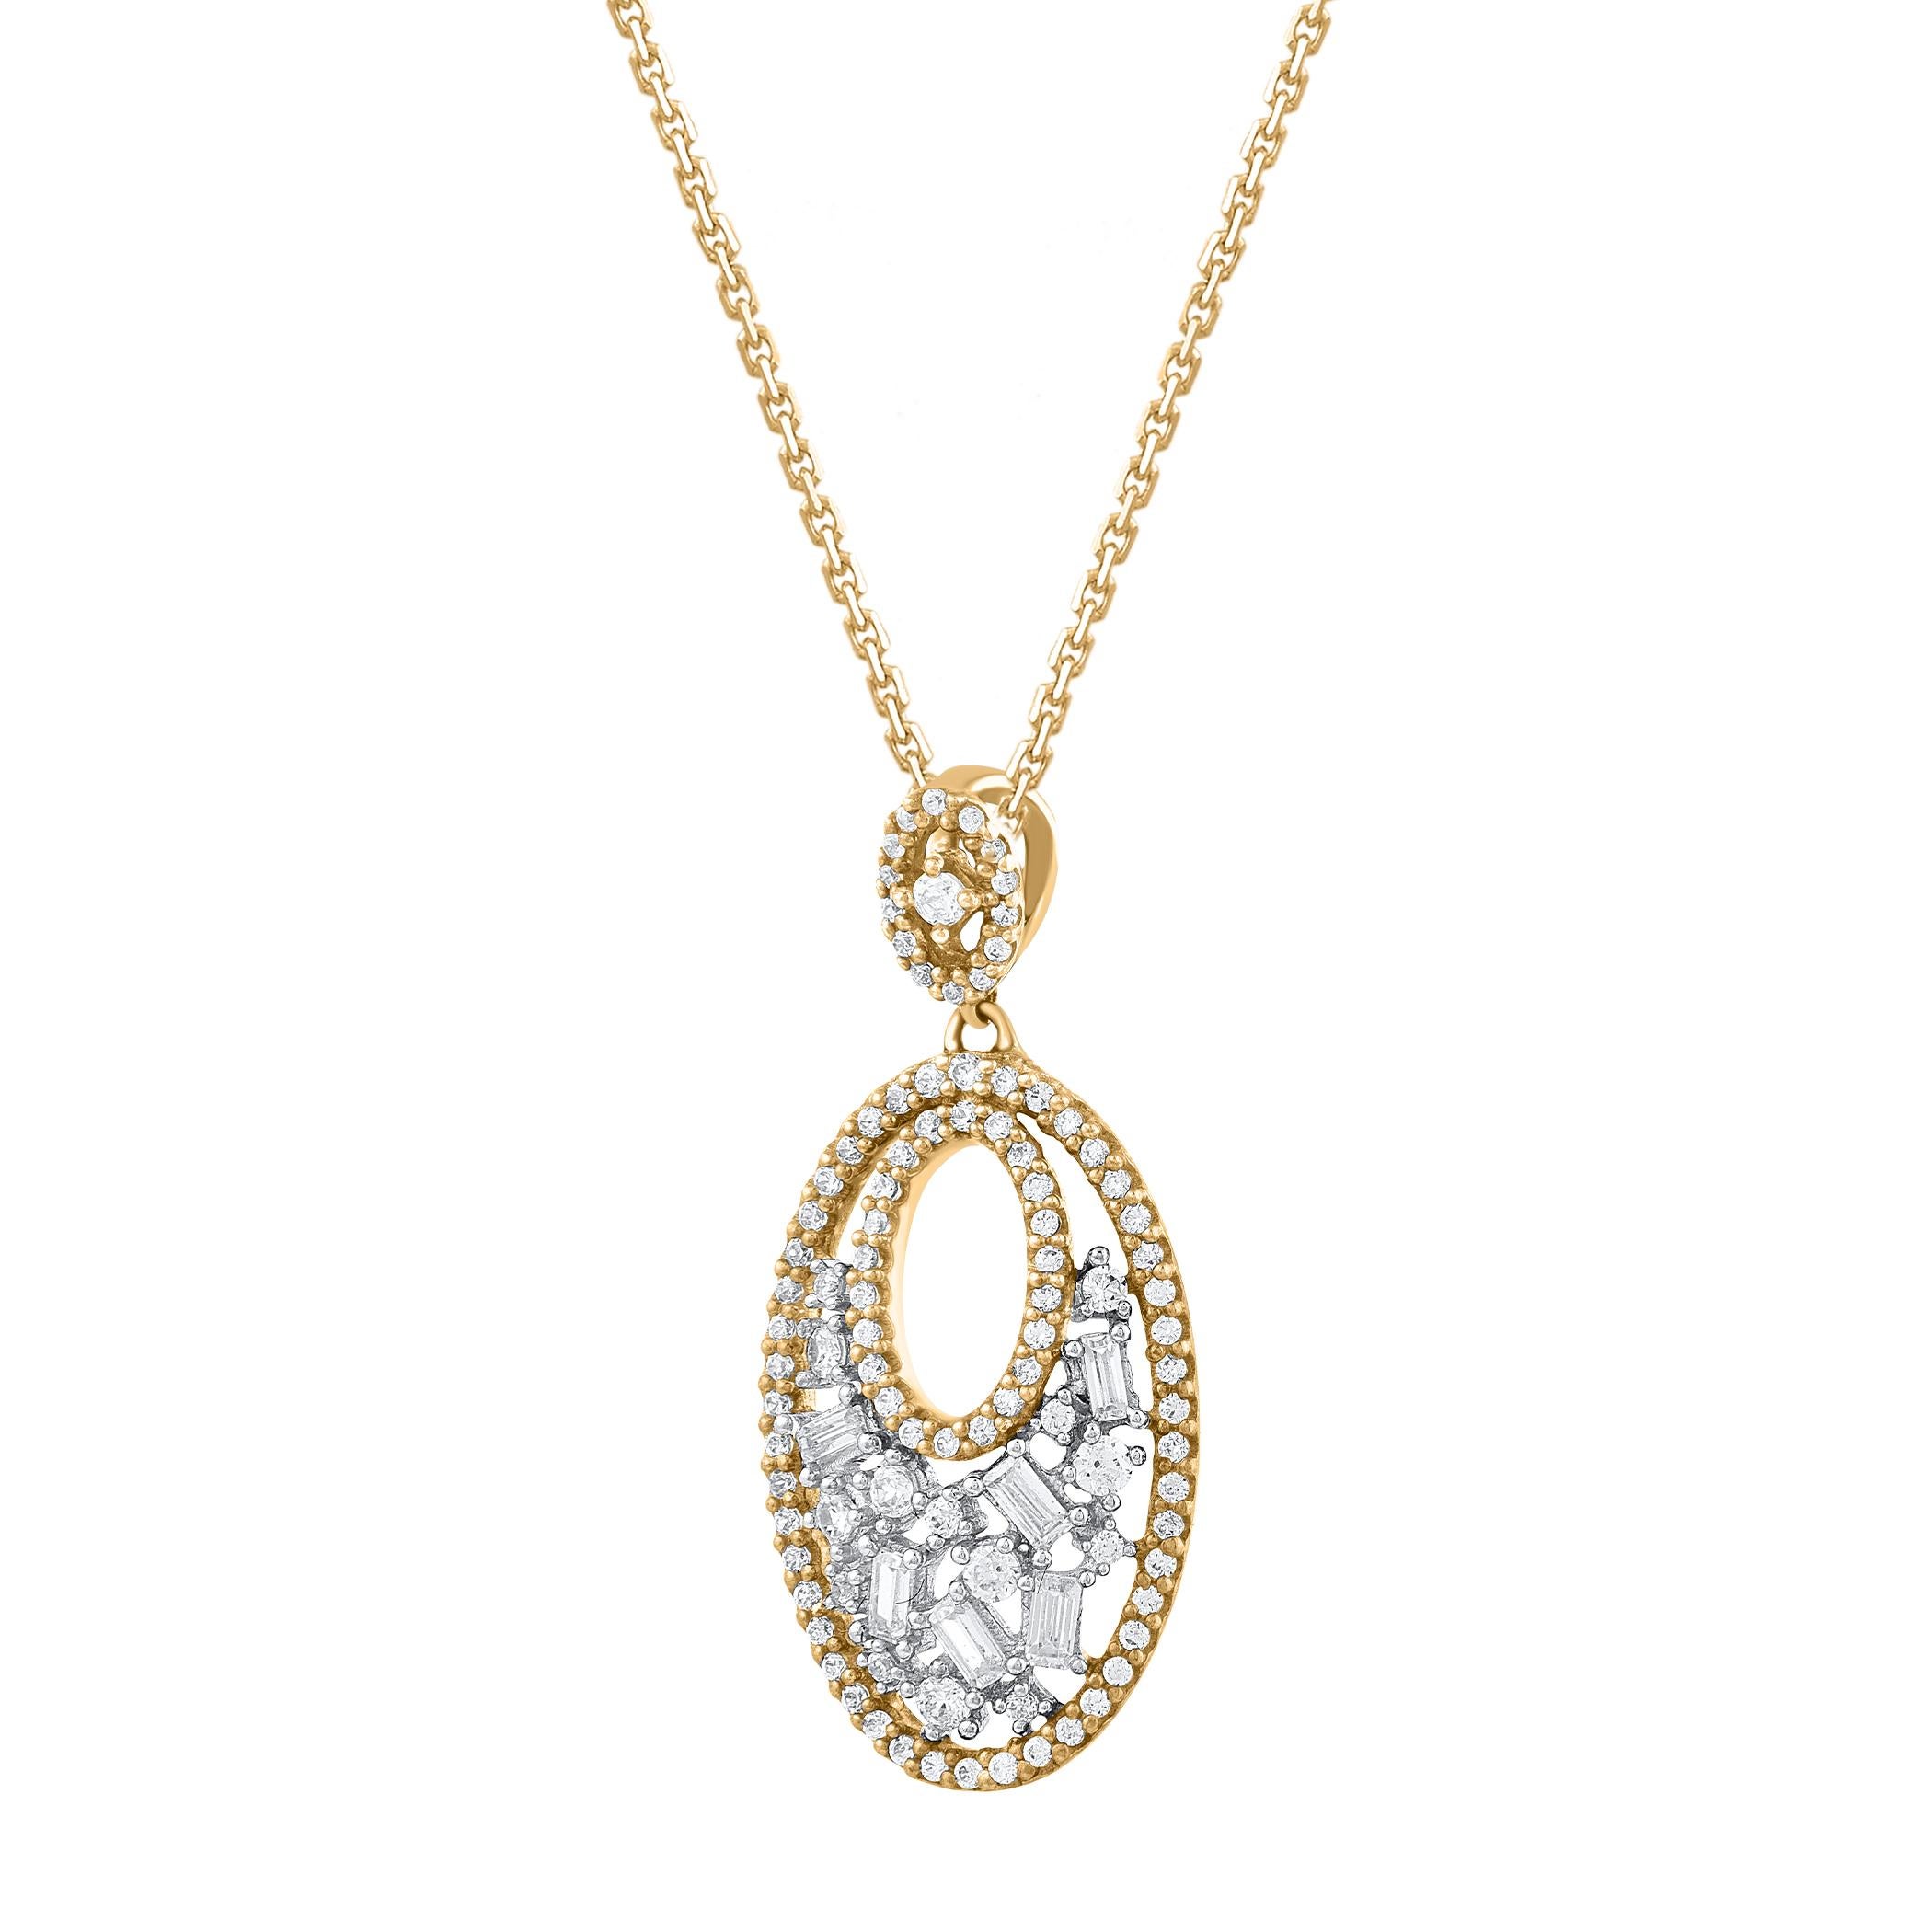 This diamond drop pendant fits any occasion with ease. This beautiful diamond pendant necklace is studded with 103 round diamonds and baguette diamonds in prong setting. The total diamond weight of these pendant is 0.50 carats. All the diamonds are